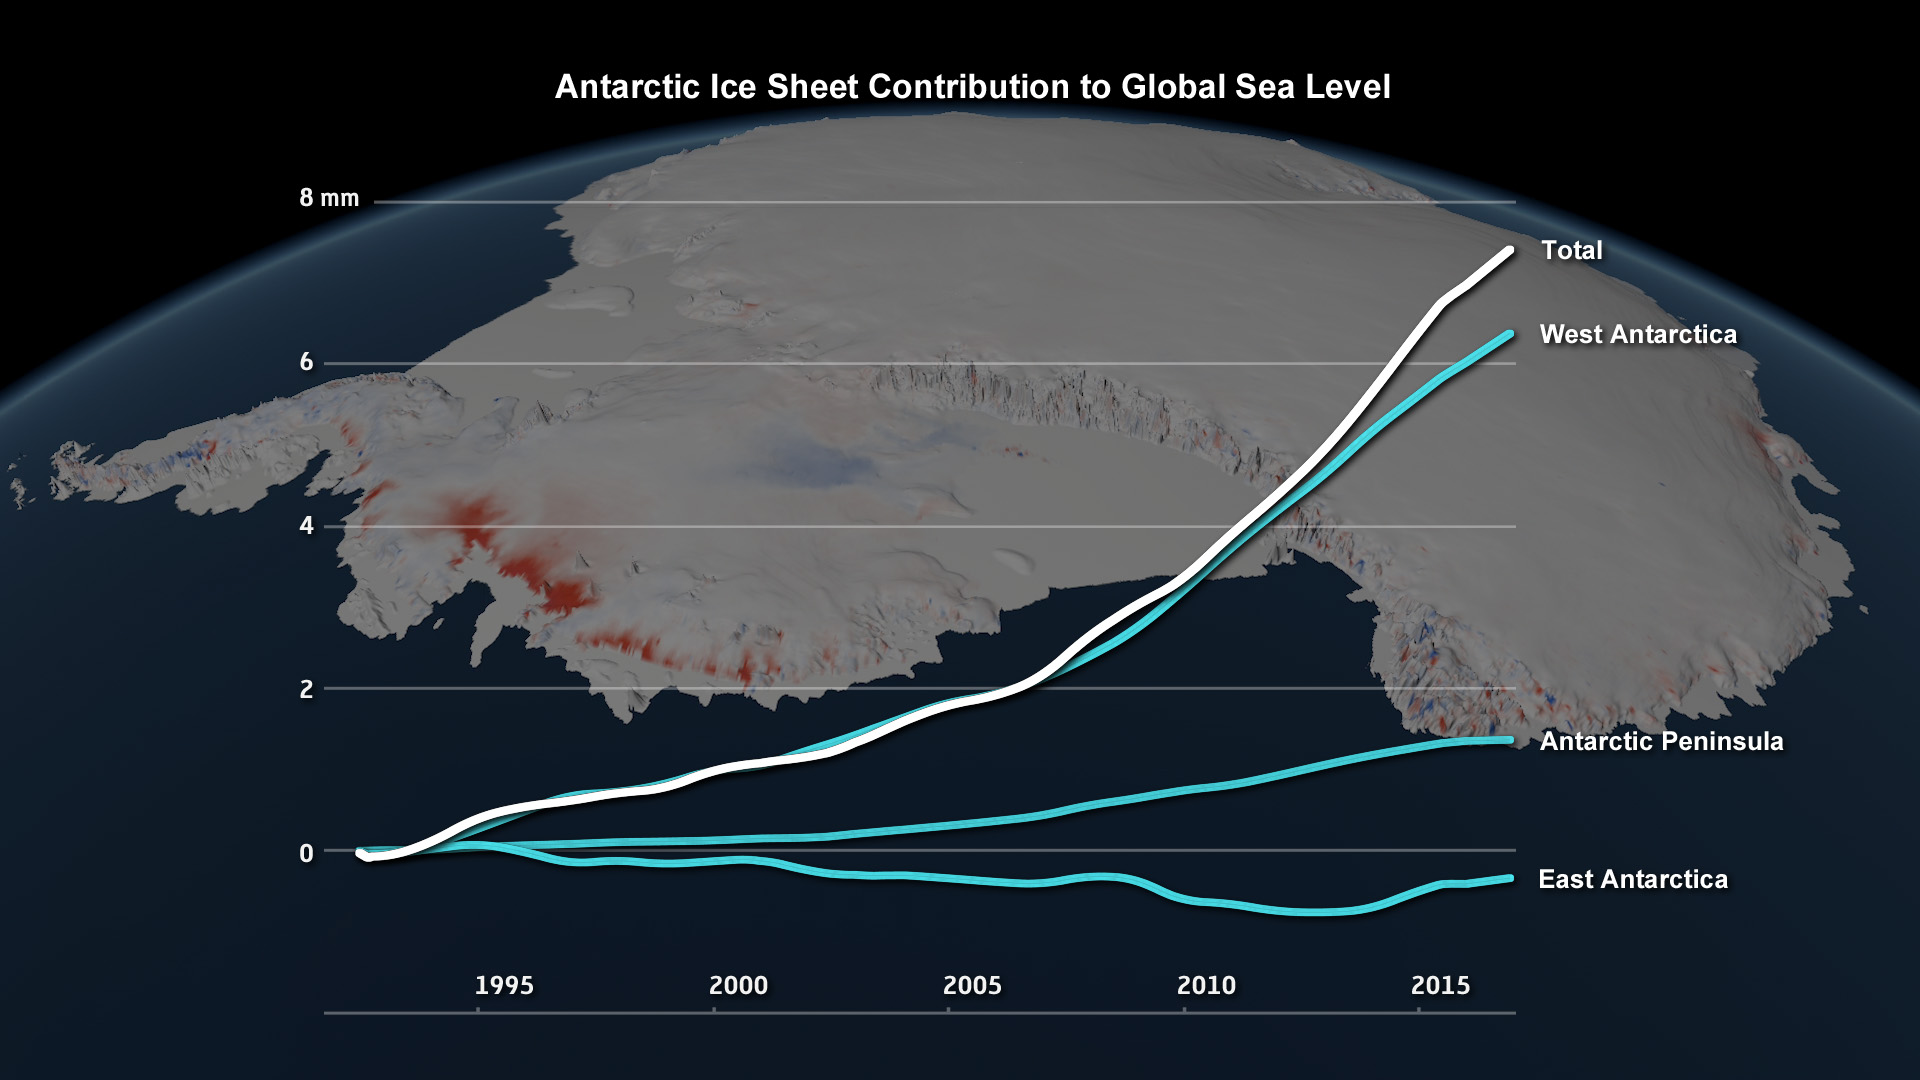 Changes in the Antarctic ice sheet’s contribution to global sea level, 1992 to 2017.